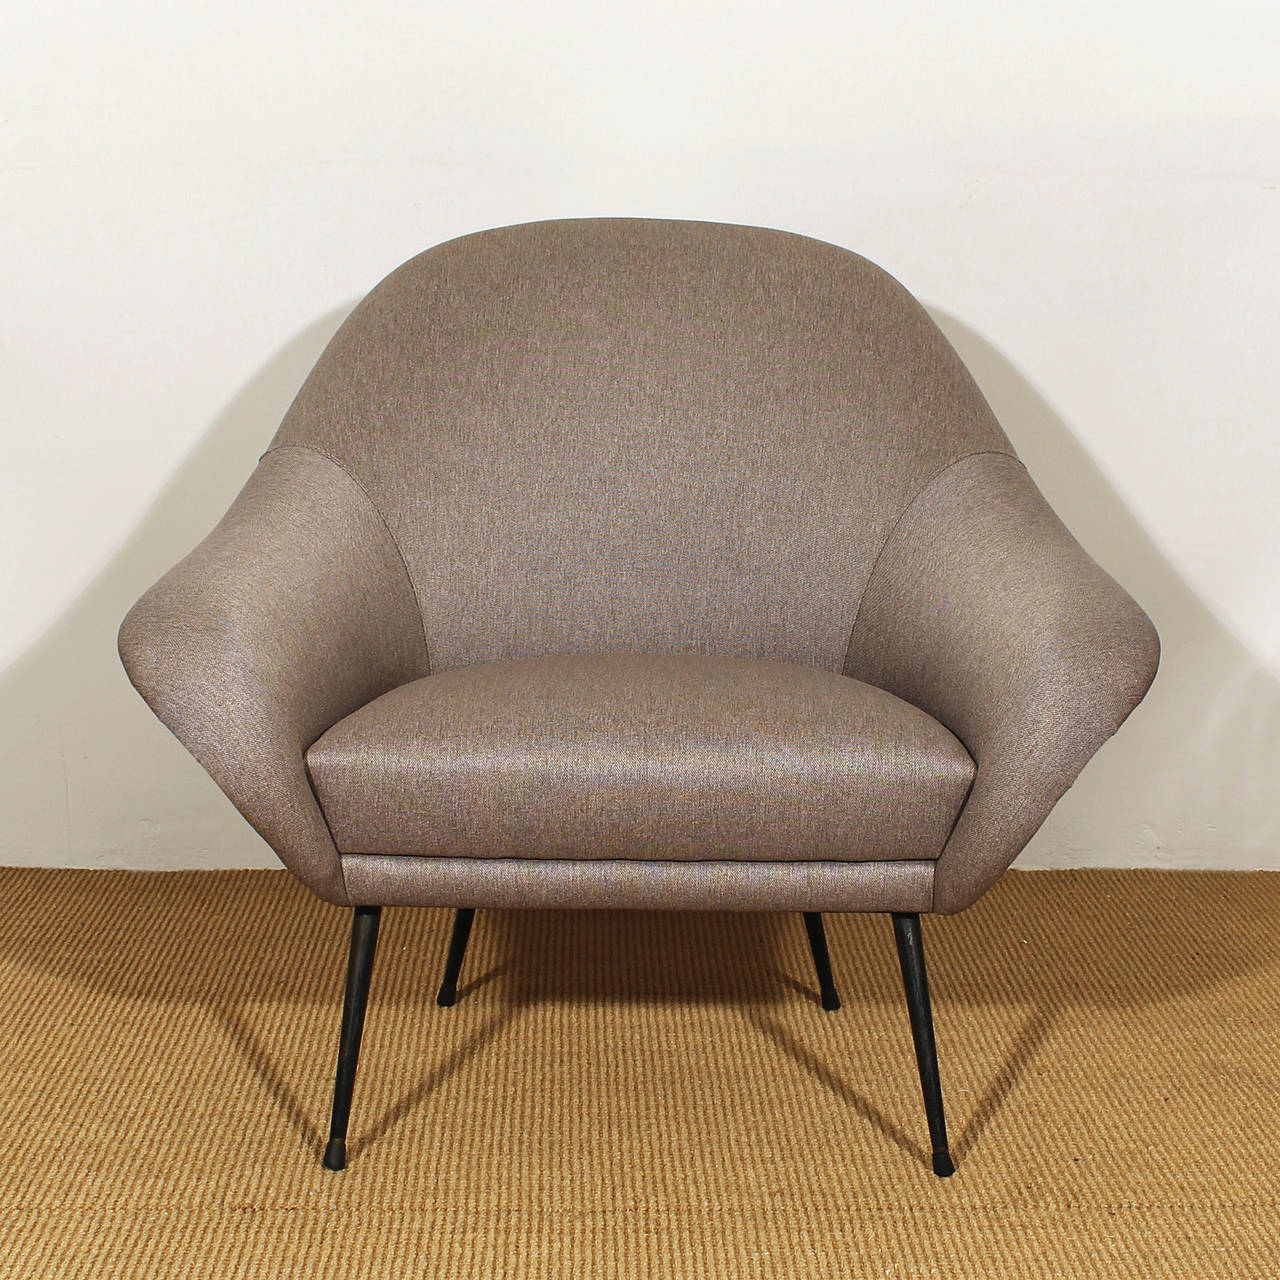 Pair of small rounded armchairs completely restored, heathered gray fabric upholstery, black lacquered metal feet.

Italy, circa 1950